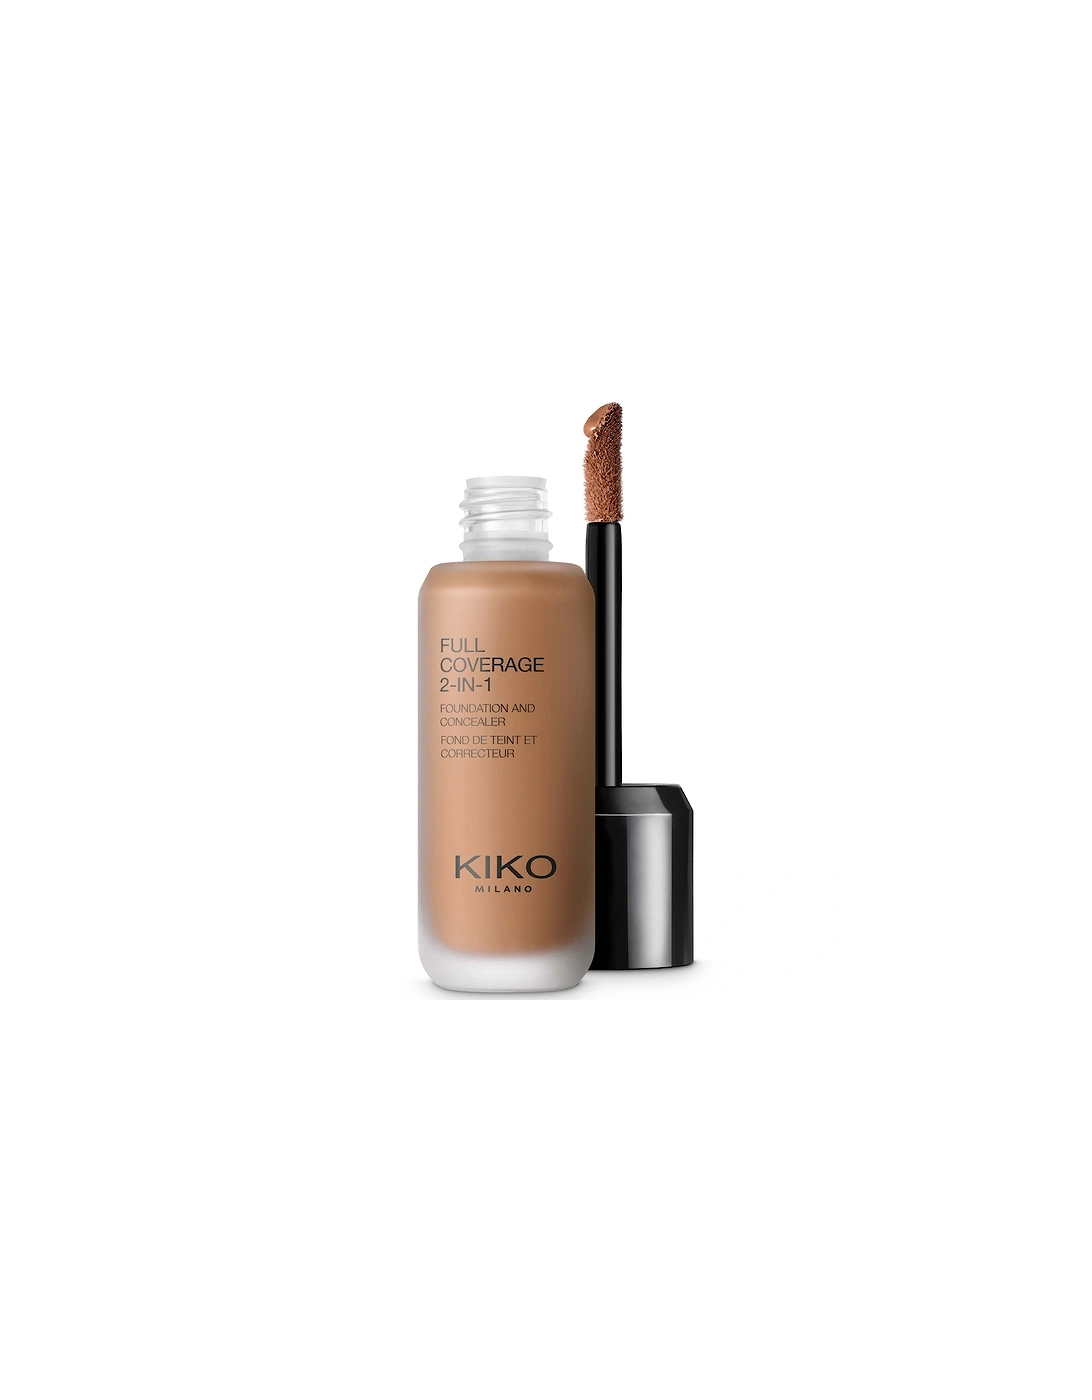 Full Coverage 2-in-1 Foundation and Concealer 25ml - 125 Neutral, 2 of 1